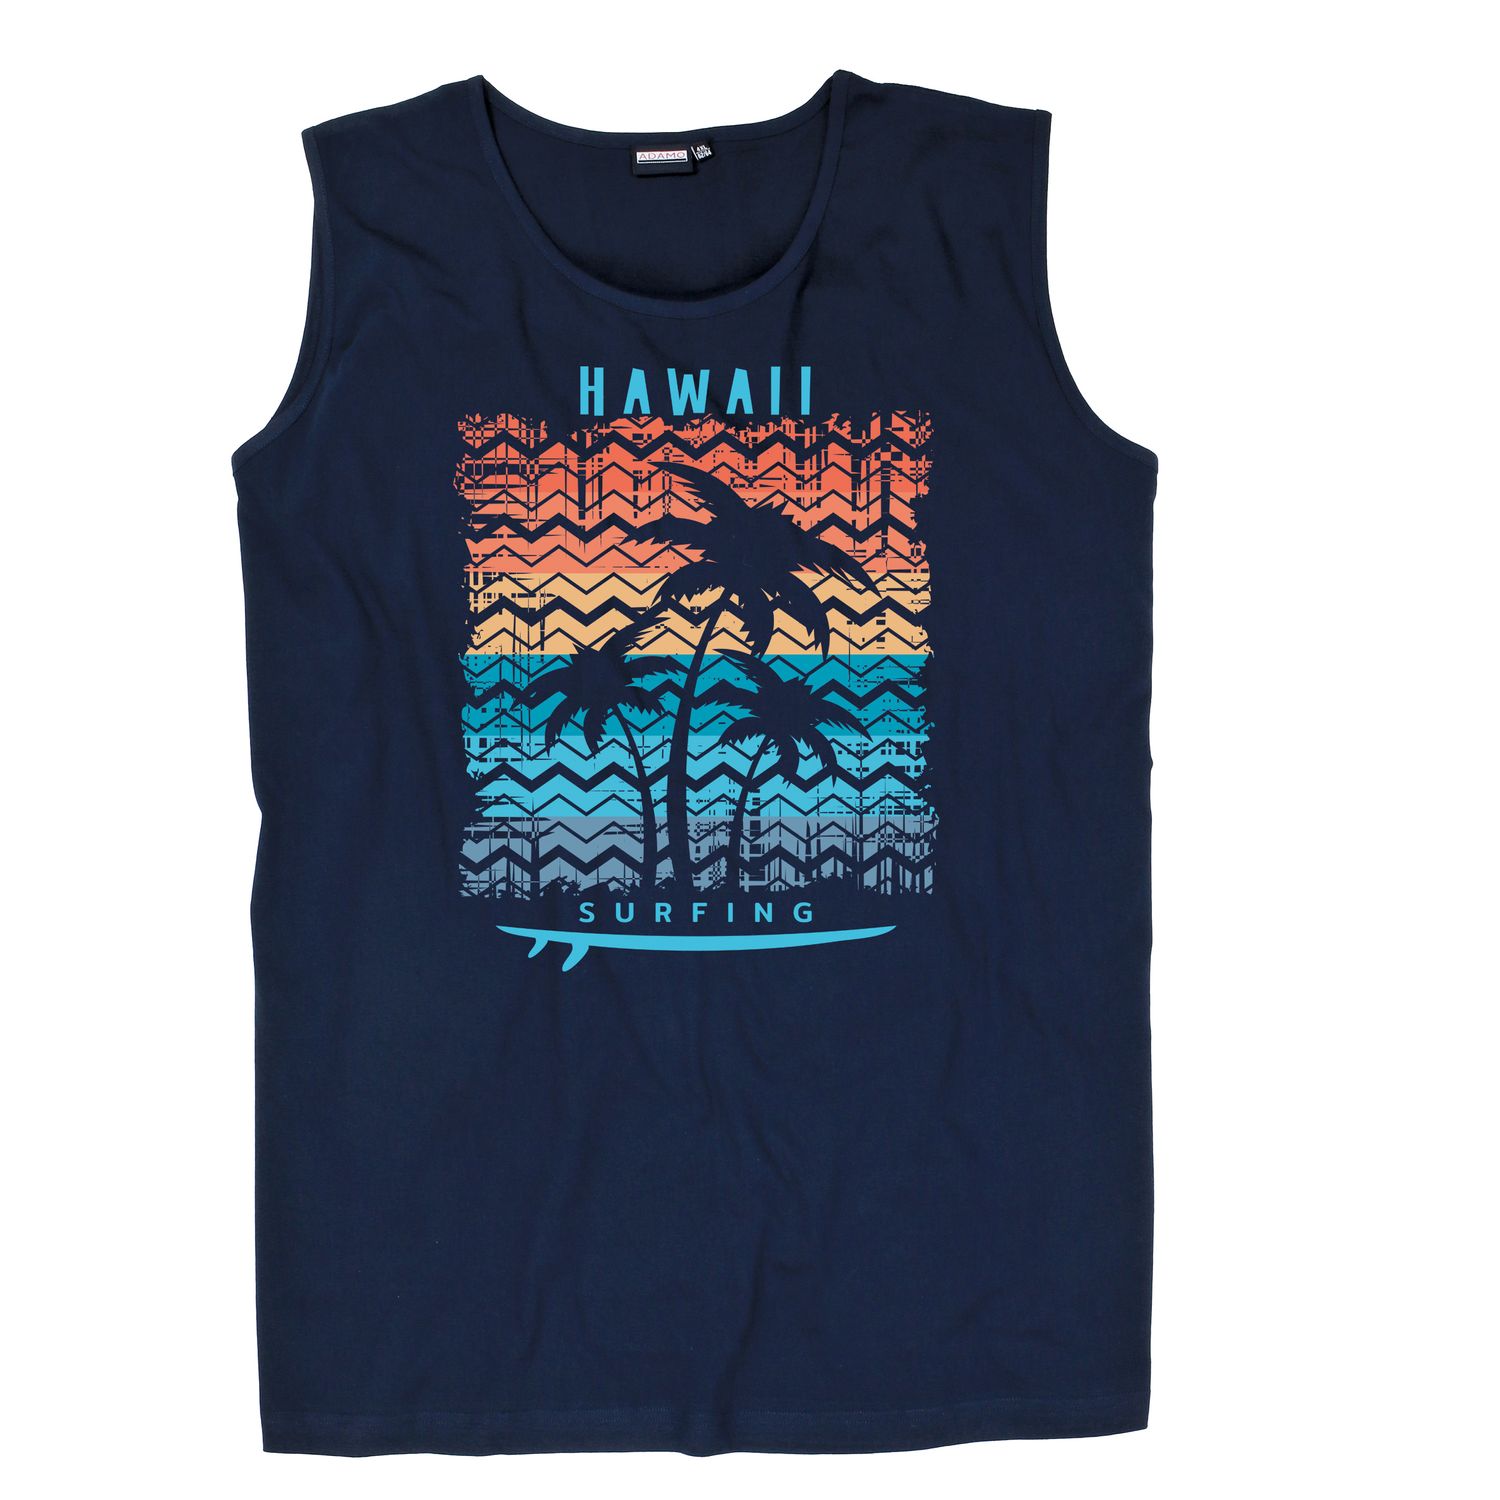 Printed muscle shirt from ADAMO in navy in sizes 2XL-12XL series "Hawaii"